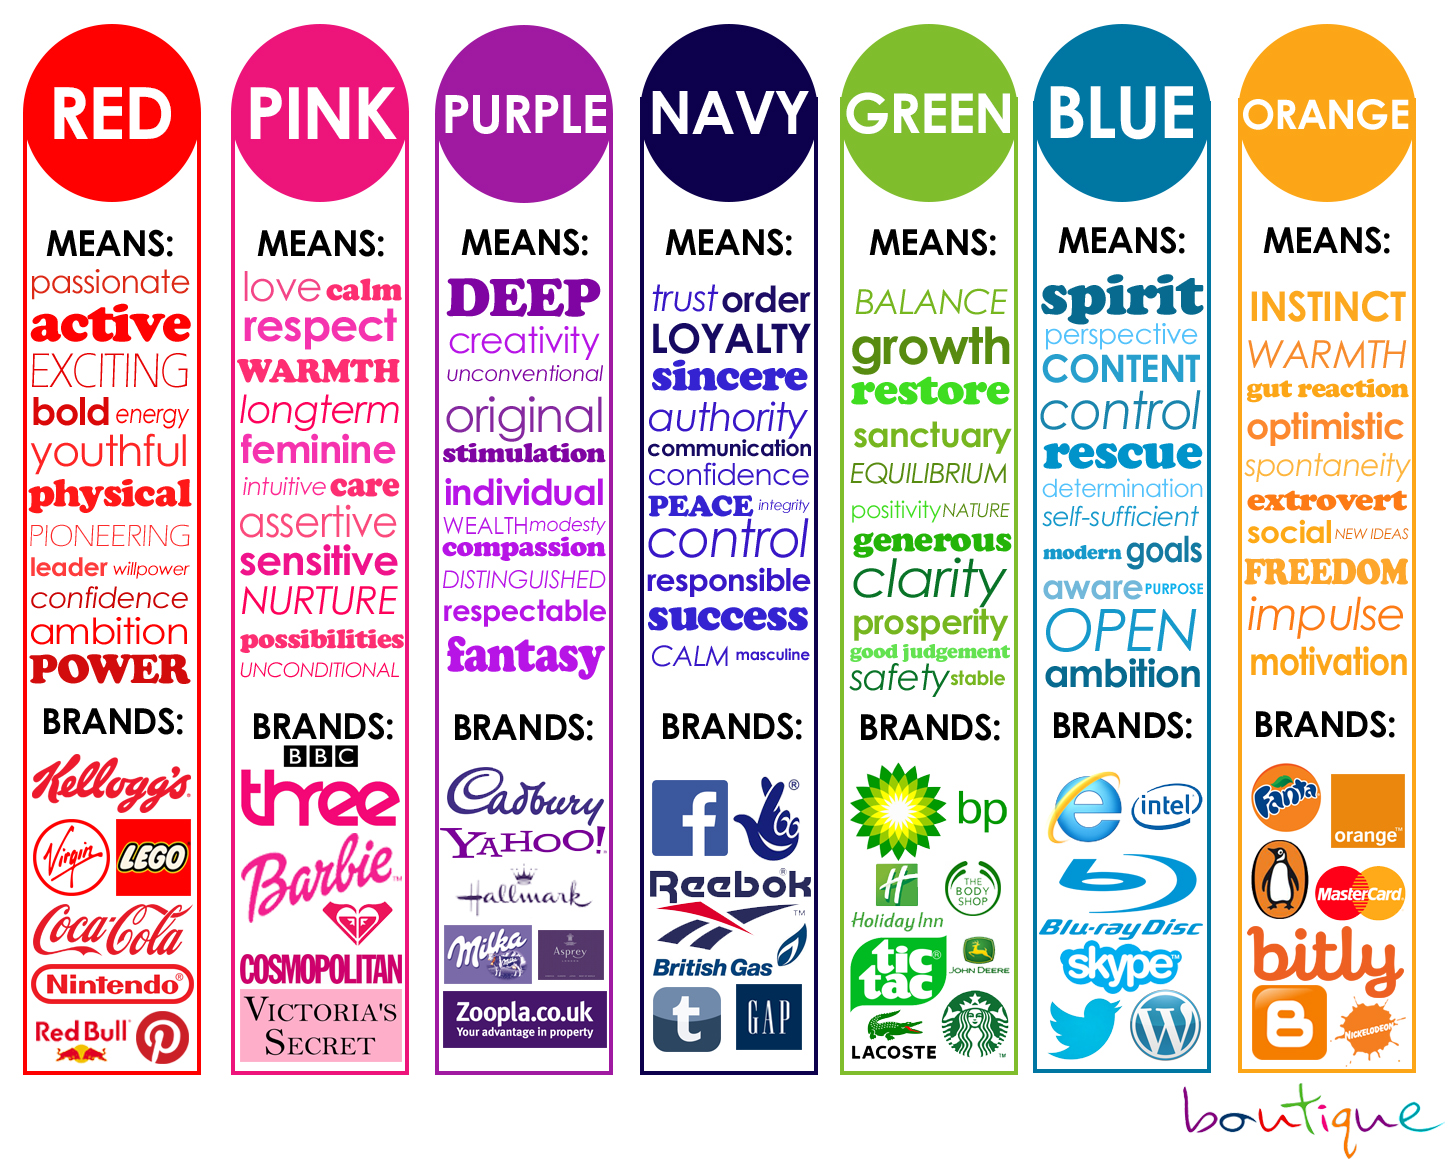 Colours-Mean-Brands1 The Psychology of Color... | ::: PHMC GPE LLC :::: Marketing & Corp. Communication Agency